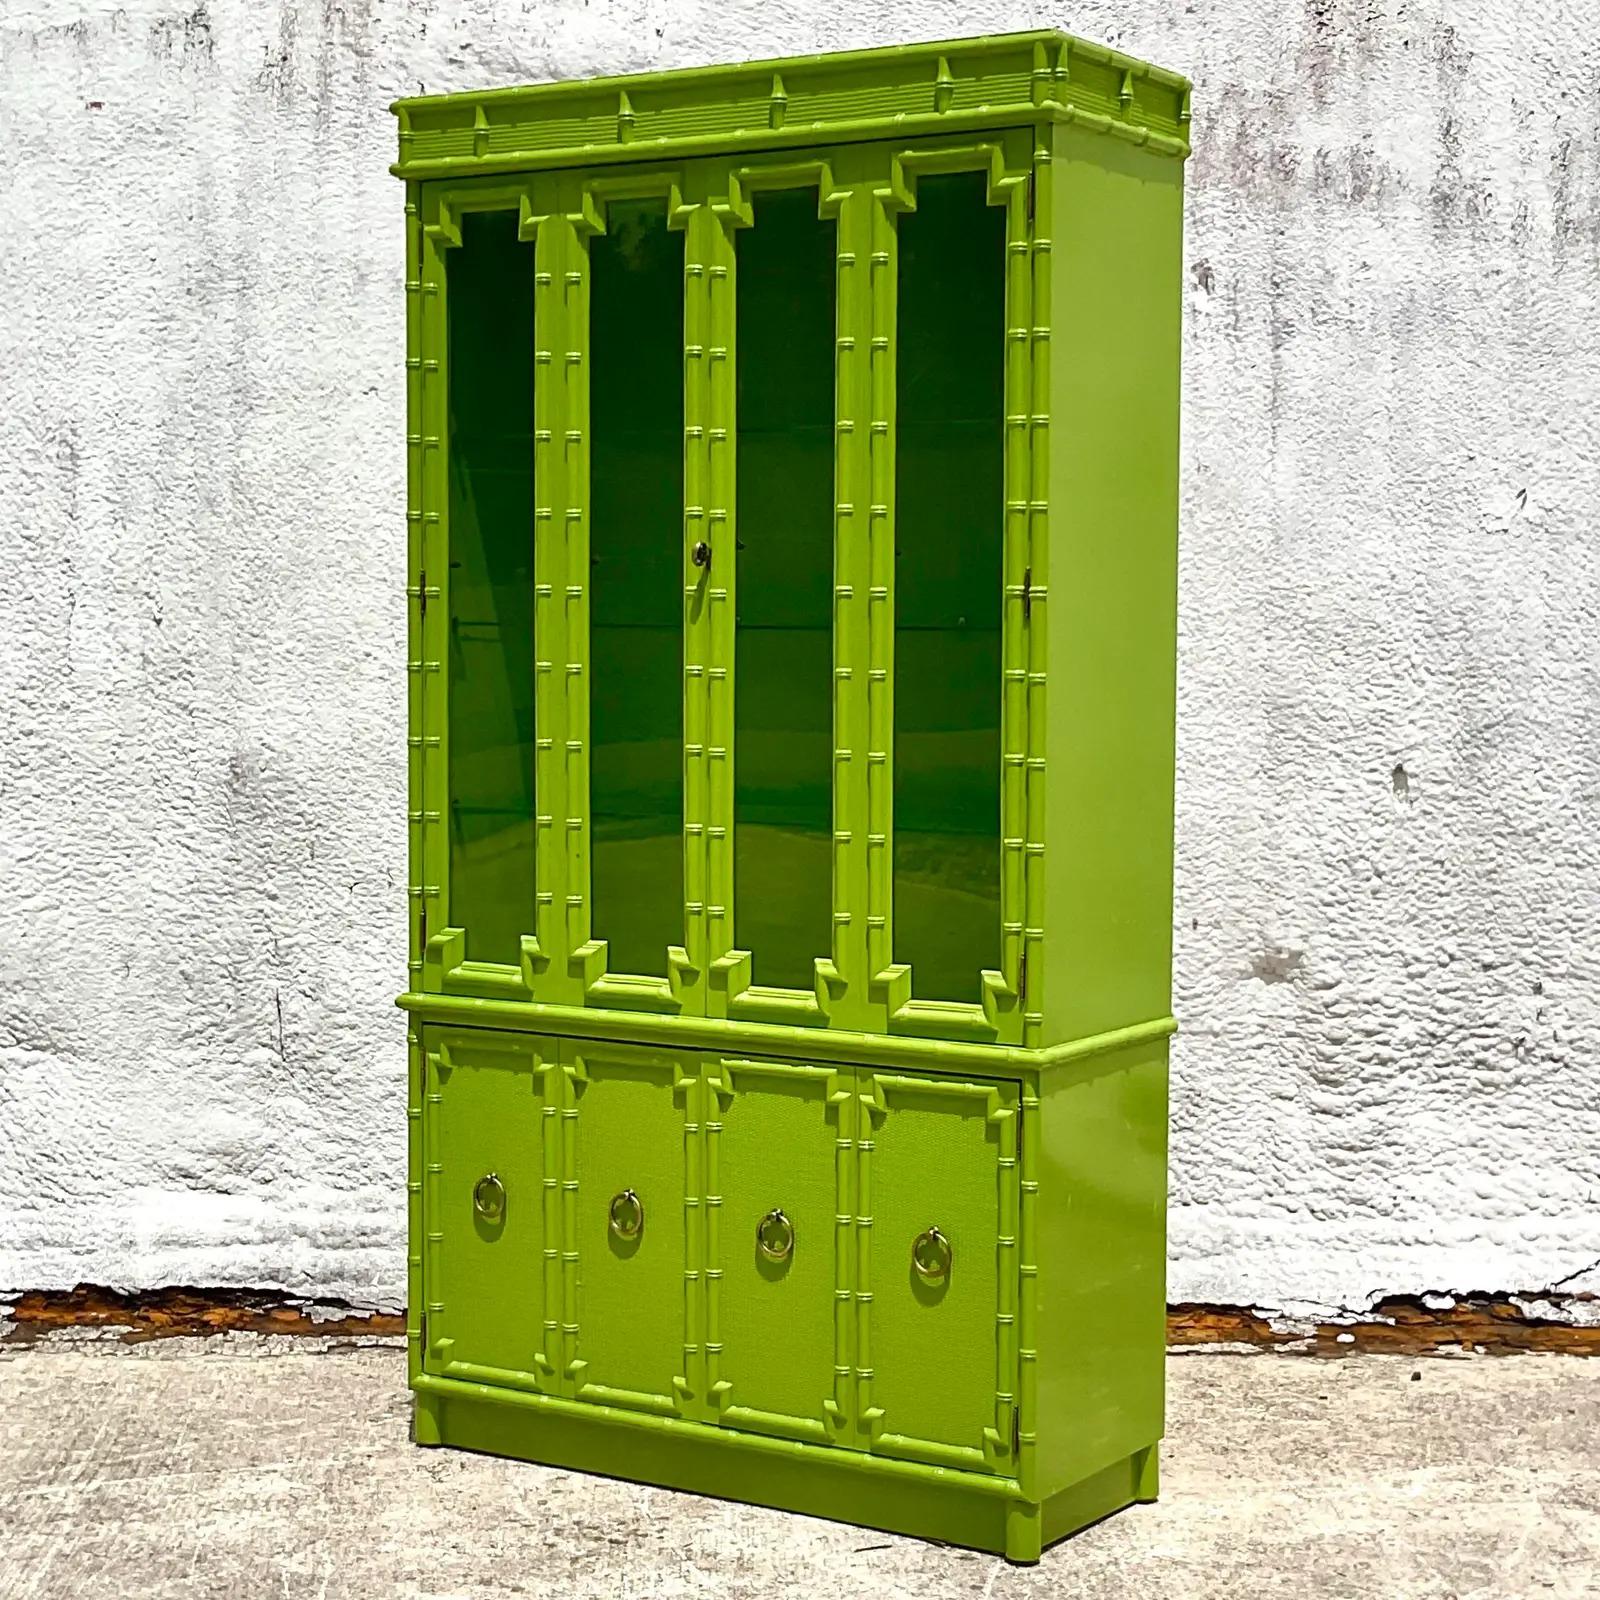 Fantastic vintage coastal China cabinet. A beautiful pea green lacquered finish on a chic bamboo trim design. Long glass doors and interior glass shelving. Acquired from a Palm Beach estate.